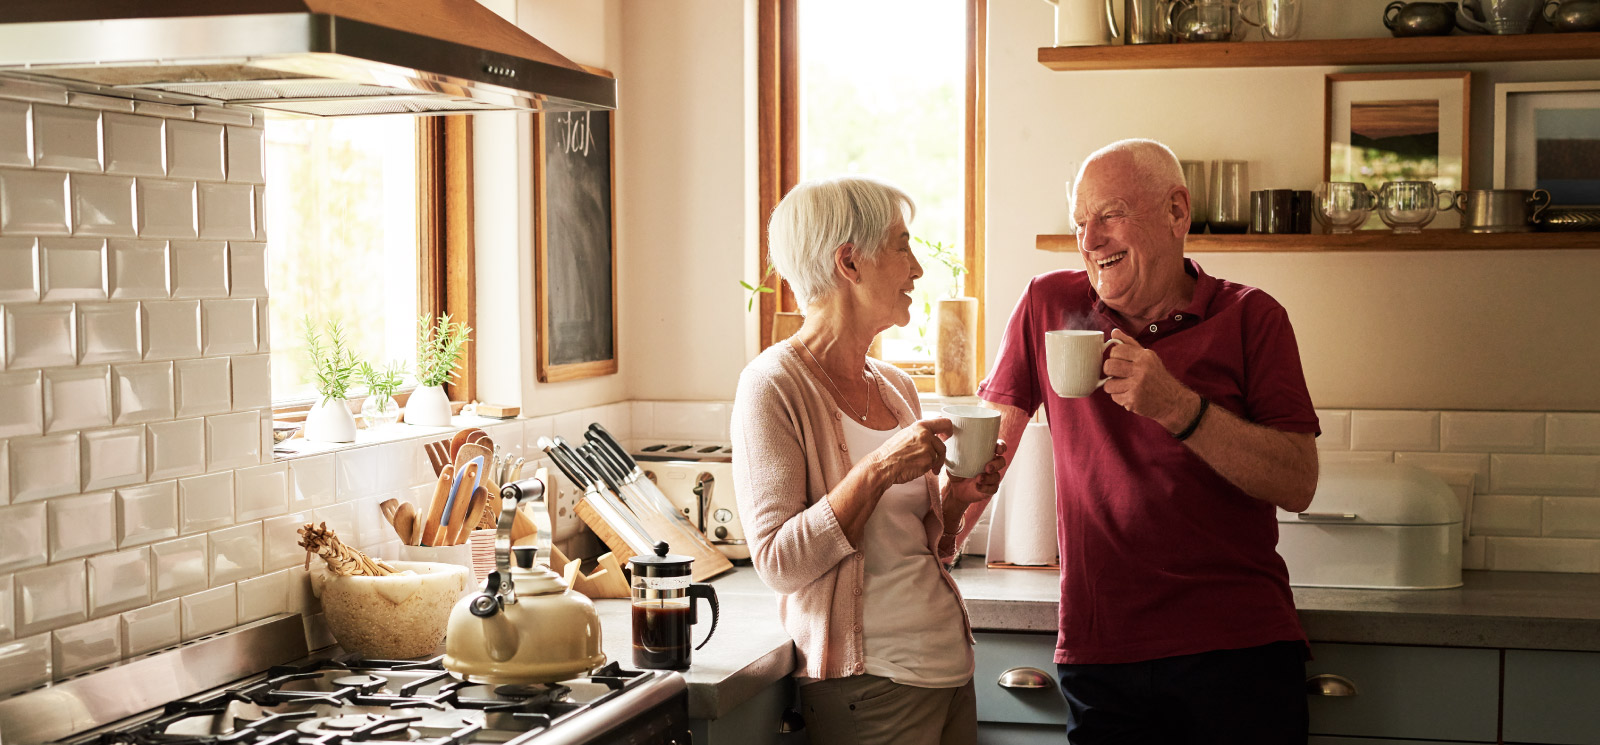 Mature couple enjoy coffee standing in kitchen.